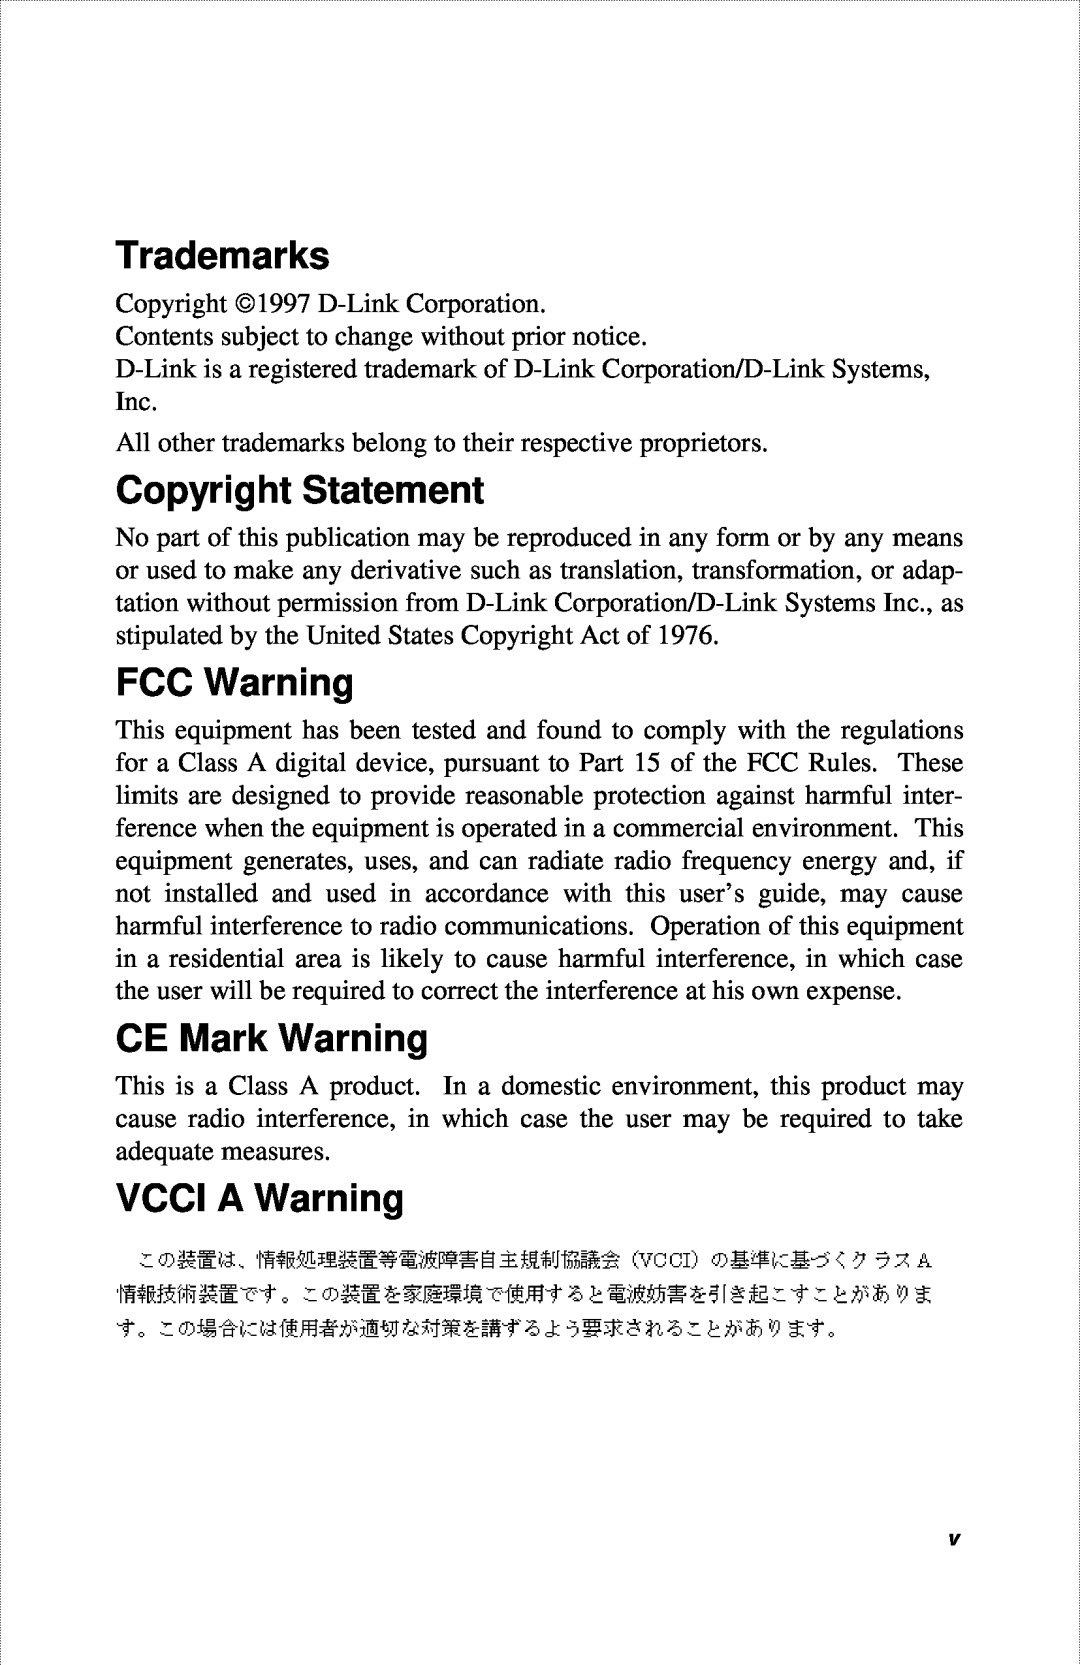 D-Link DFE-916X manual Trademarks, Copyright Statement, FCC Warning, CE Mark Warning, VCCI A Warning 